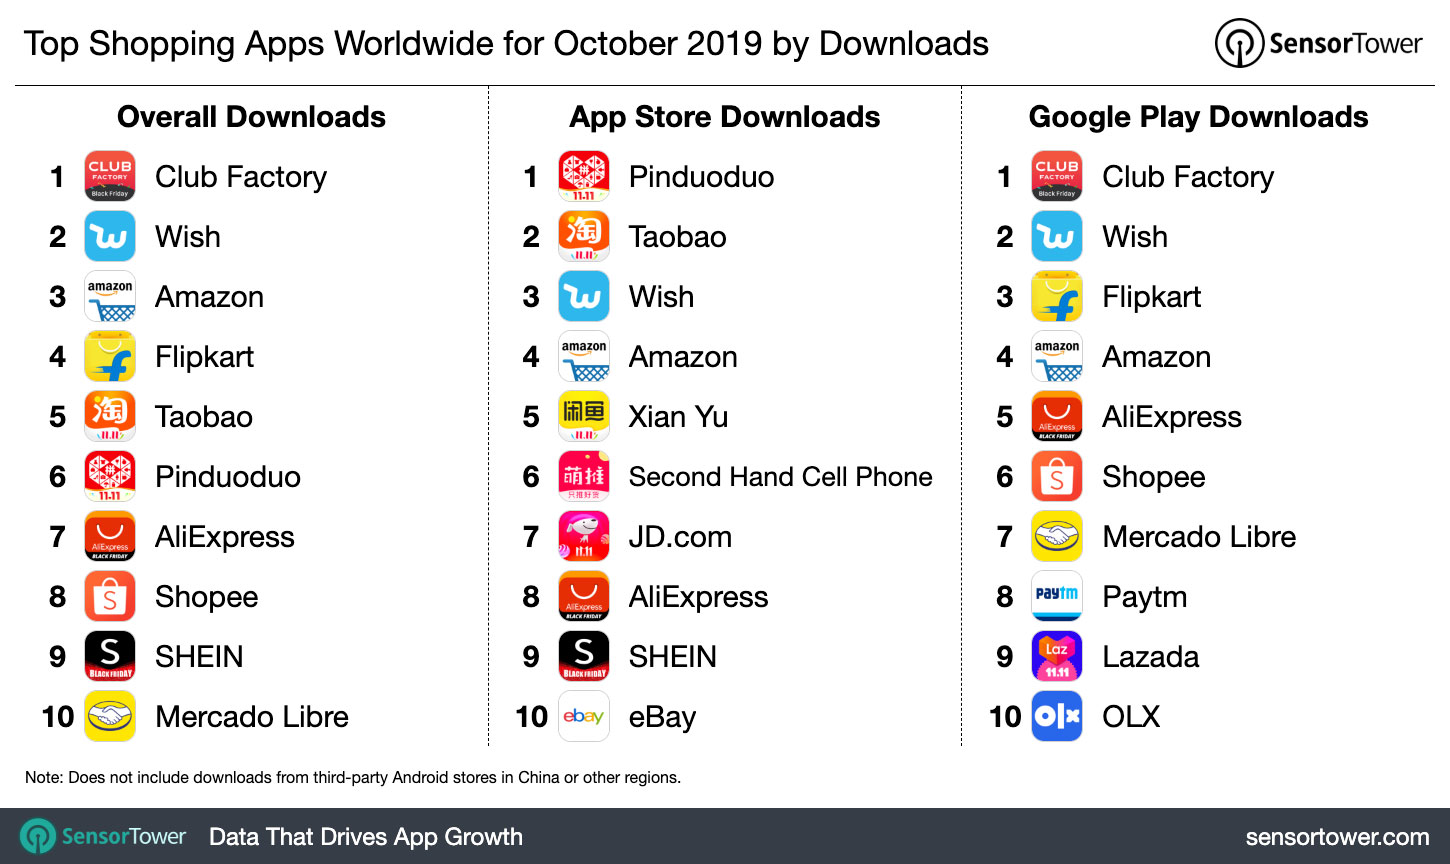 Top Shopping Apps Worldwide for October 2019 by Downloads